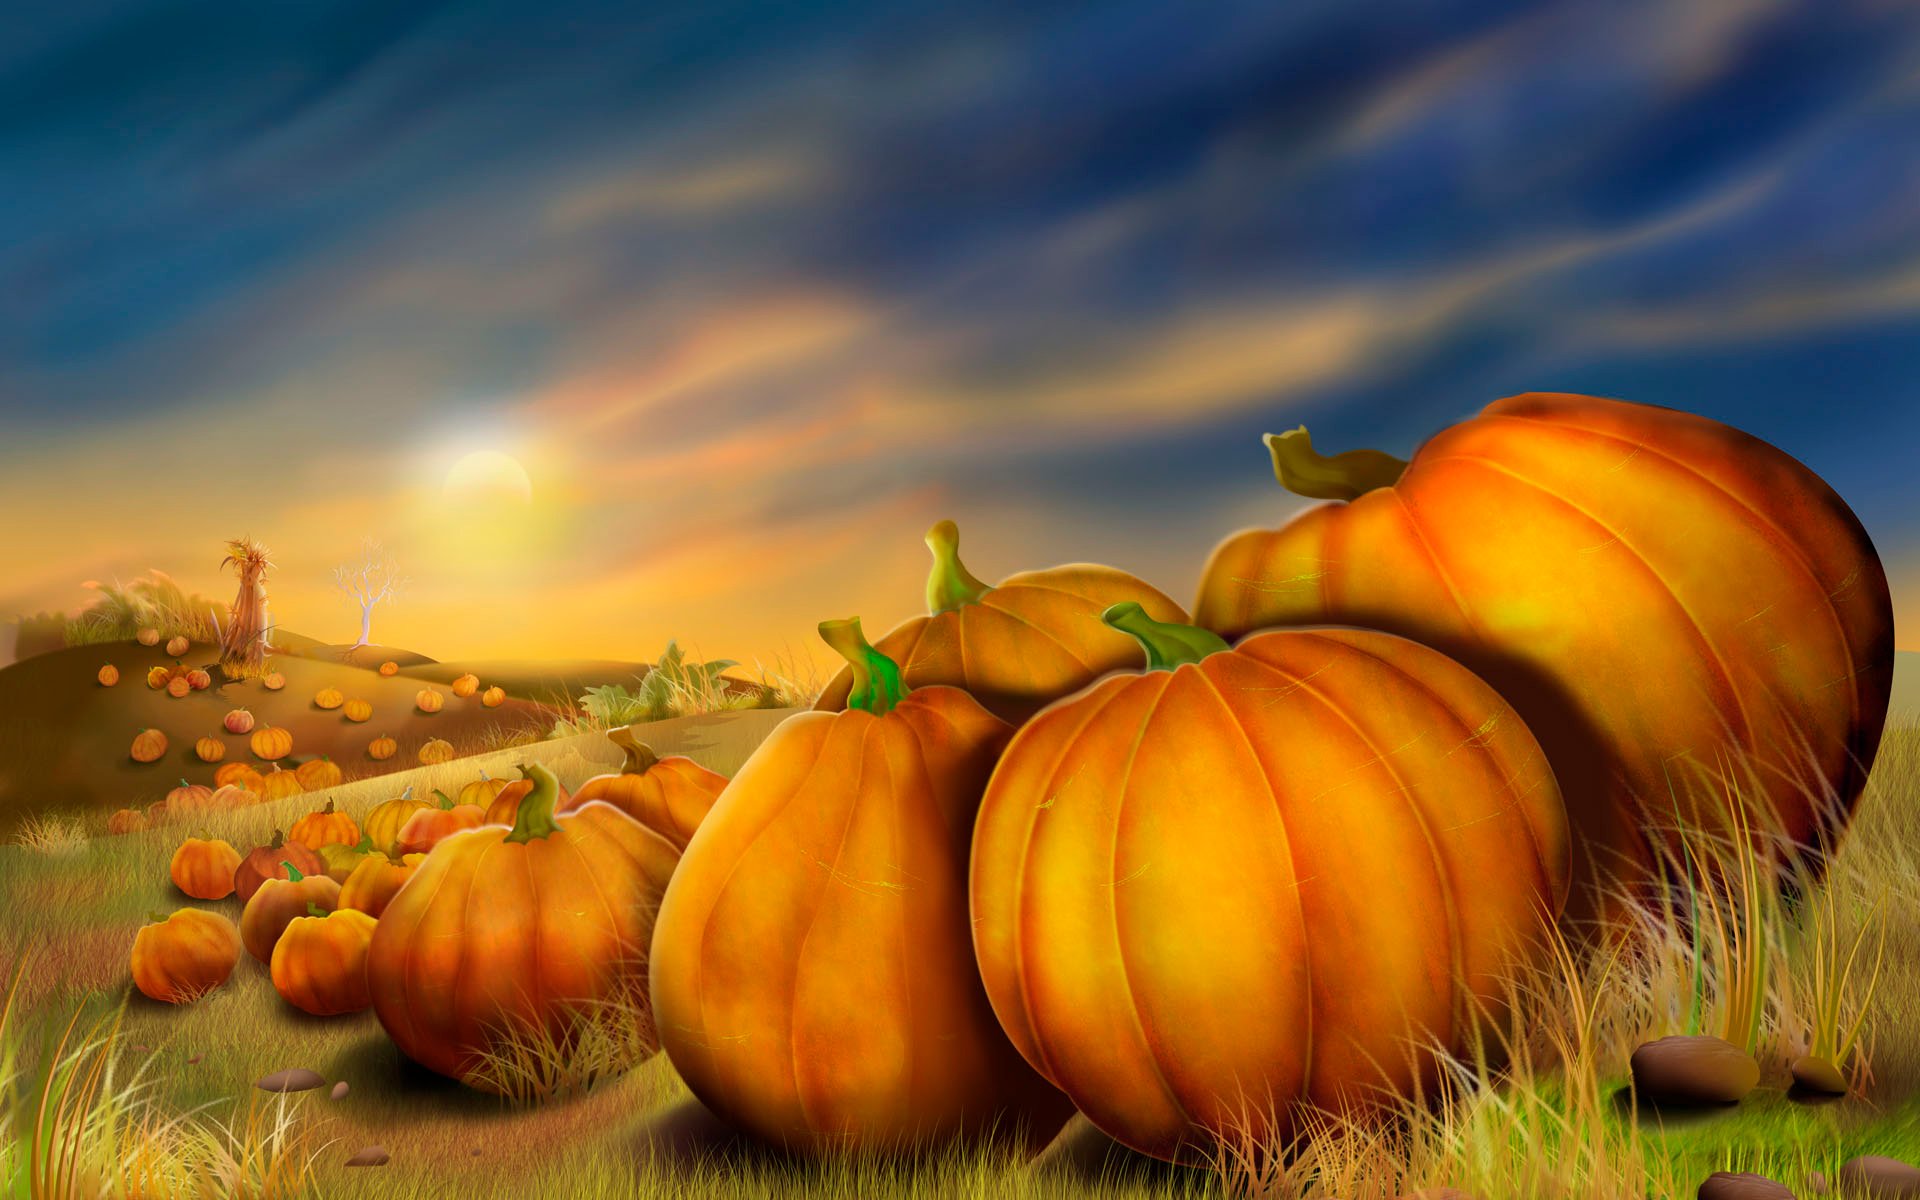 Free download Pumpkins With Fall Leaves Royalty Stock P 2259 HD [1920x1200] for your Desktop, Mobile & Tablet. Explore Fall Pumpkin Wallpaper. Free Pumpkin Wallpaper, Halloween Pumpkin Wallpaper, Great Pumpkin Wallpaper